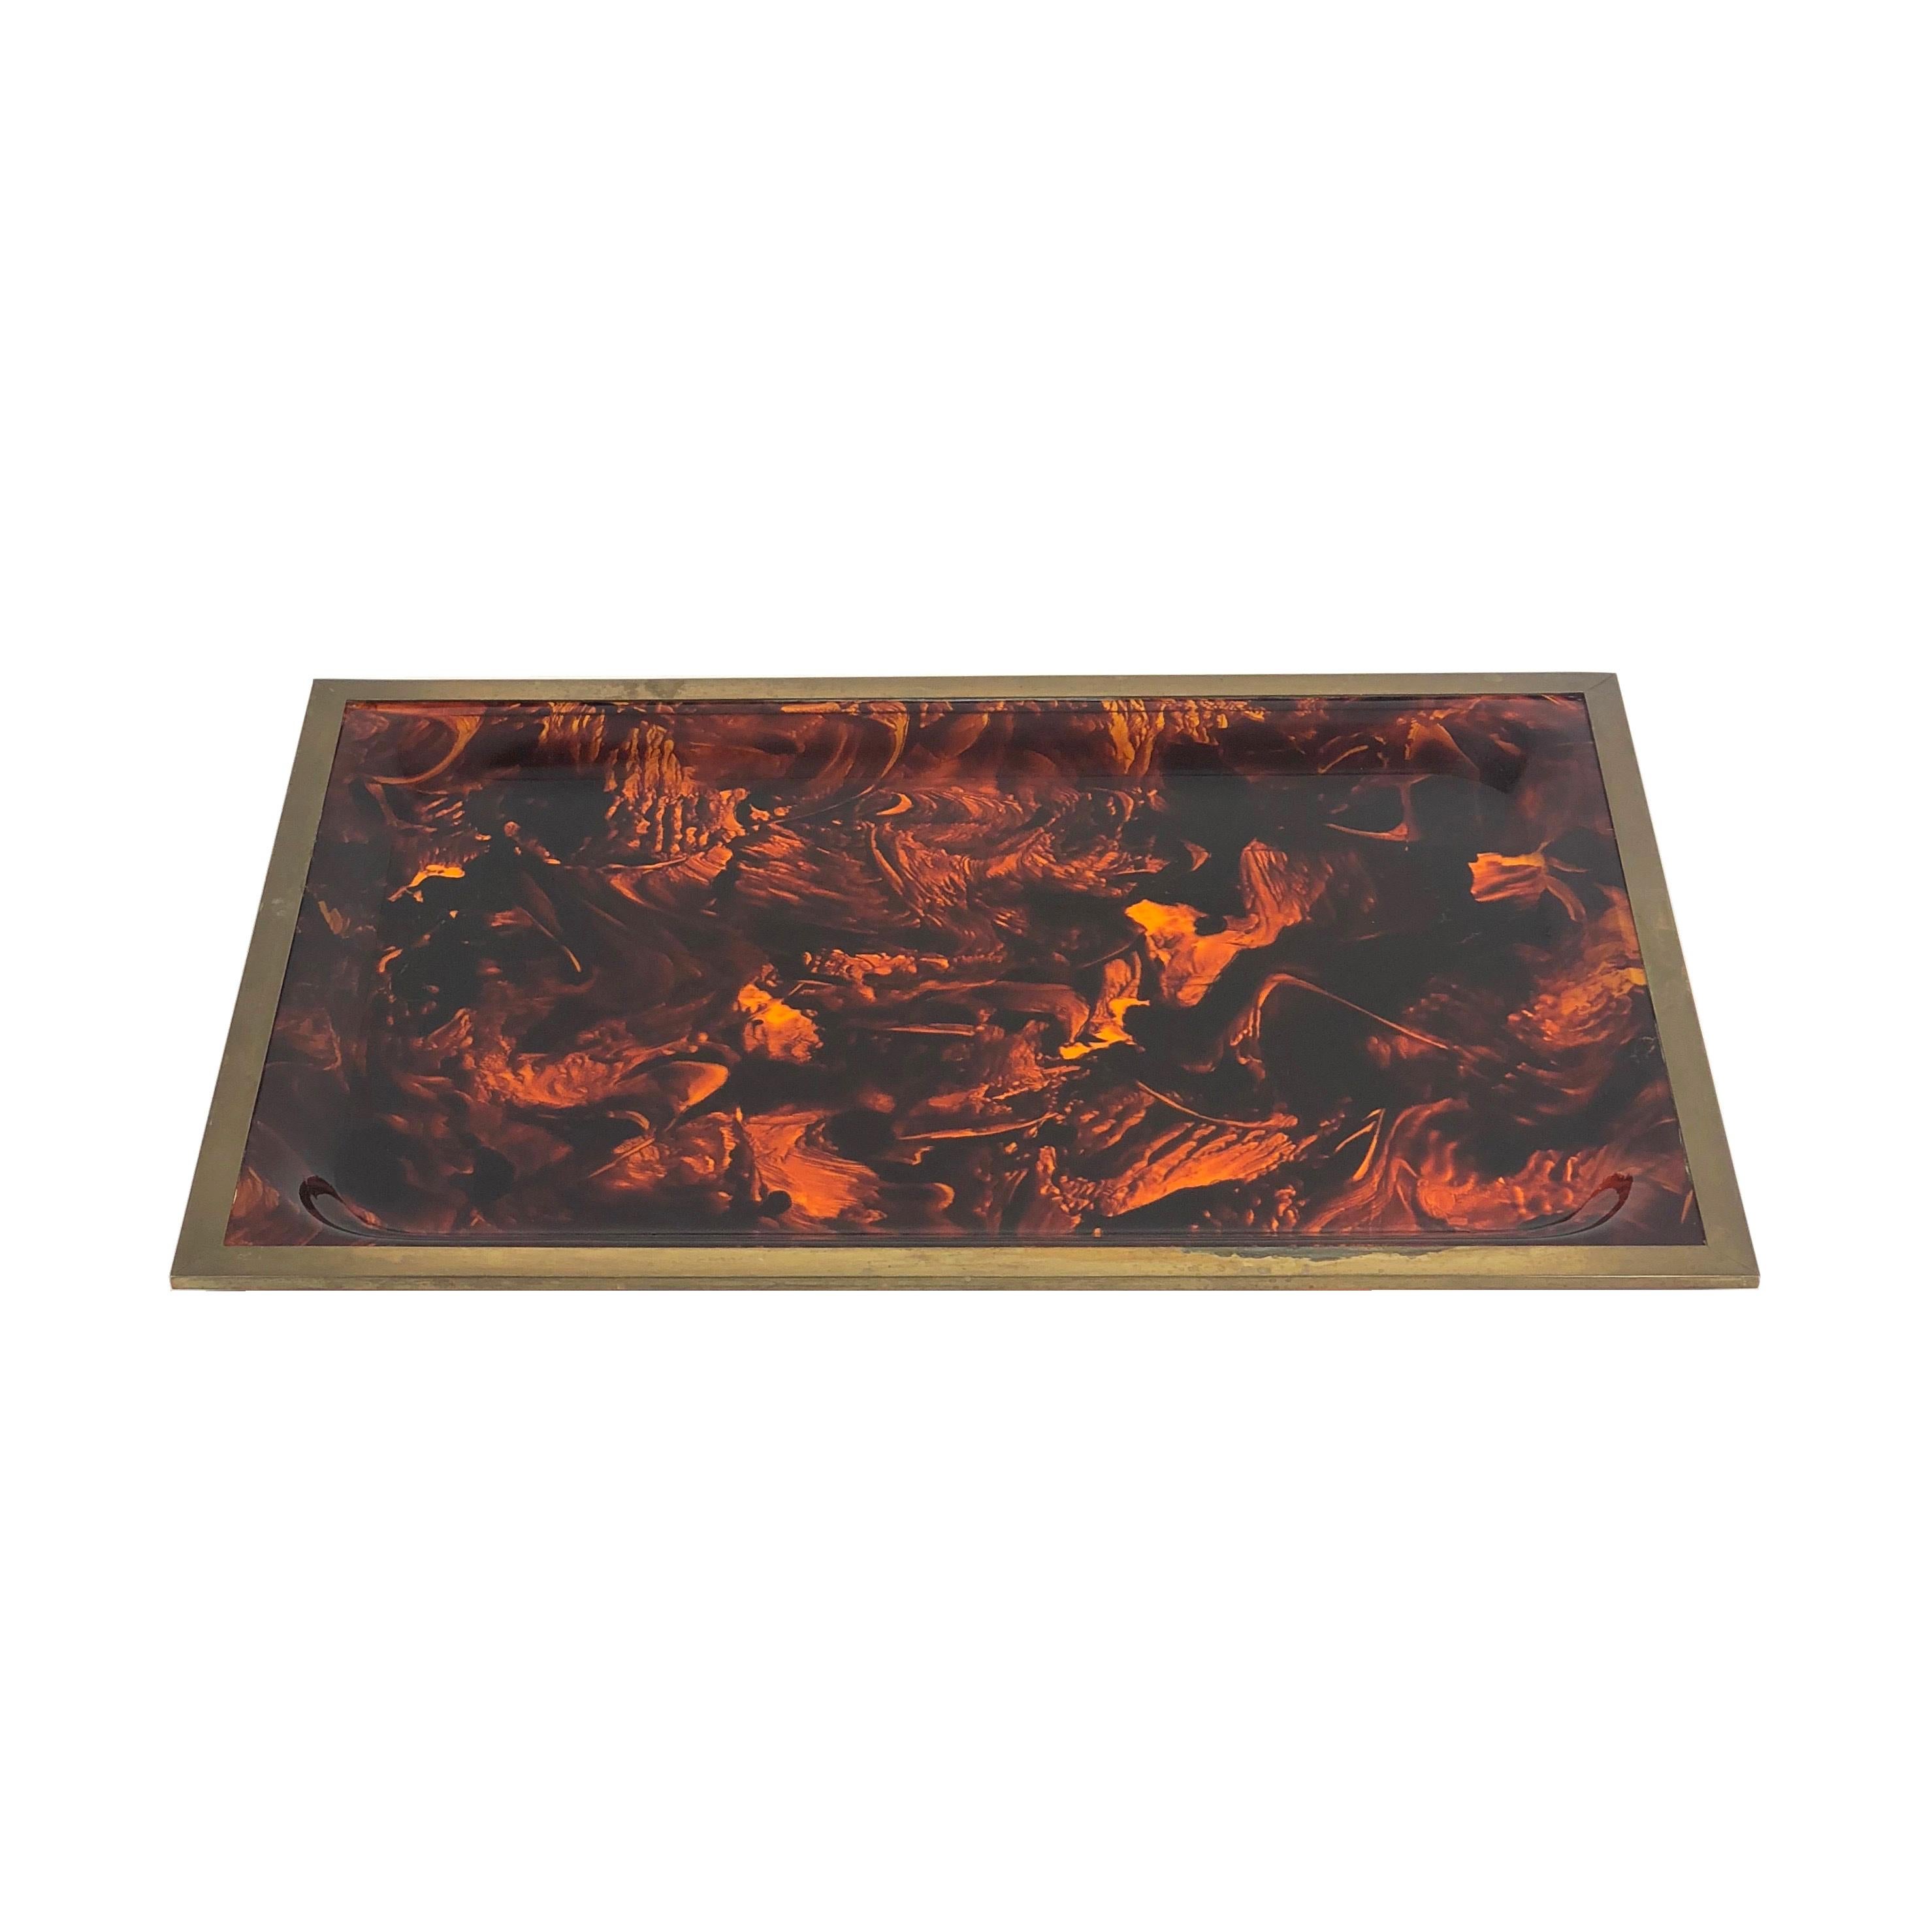 Stunning Mid-Century Modernist barware serving tray platter for Christian Dior Home collection. Large rectangular shape with Lucite in faux tortoiseshell pattern and color and brass metal border.